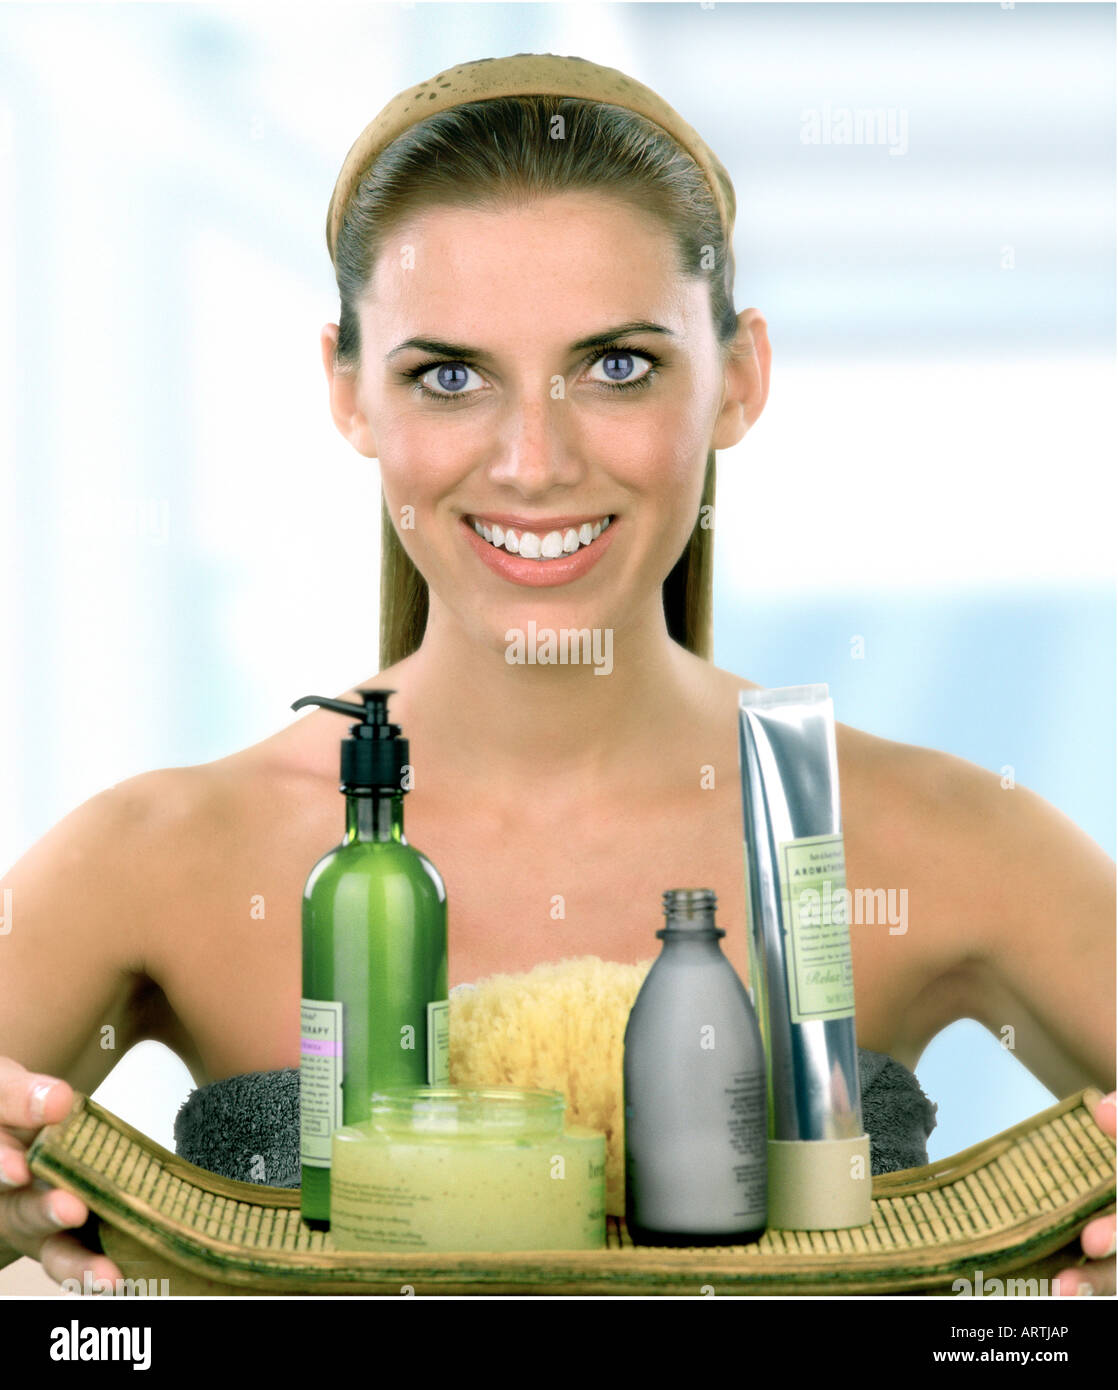 A woman holding a tray filled with beauty products Stock Photo